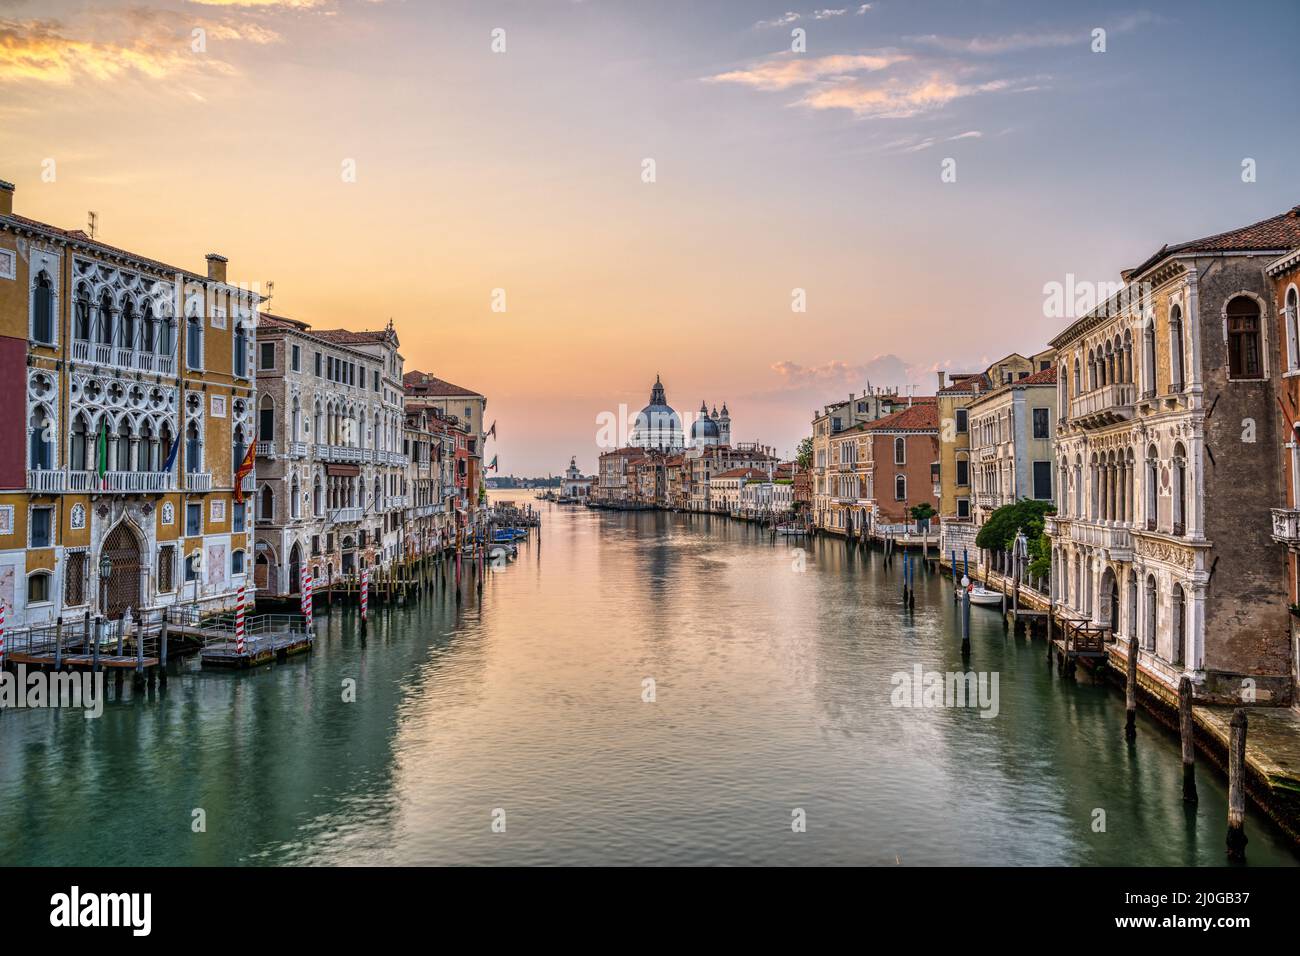 The famous Grand Canal in Venice, Italy, at sunrise Stock Photo